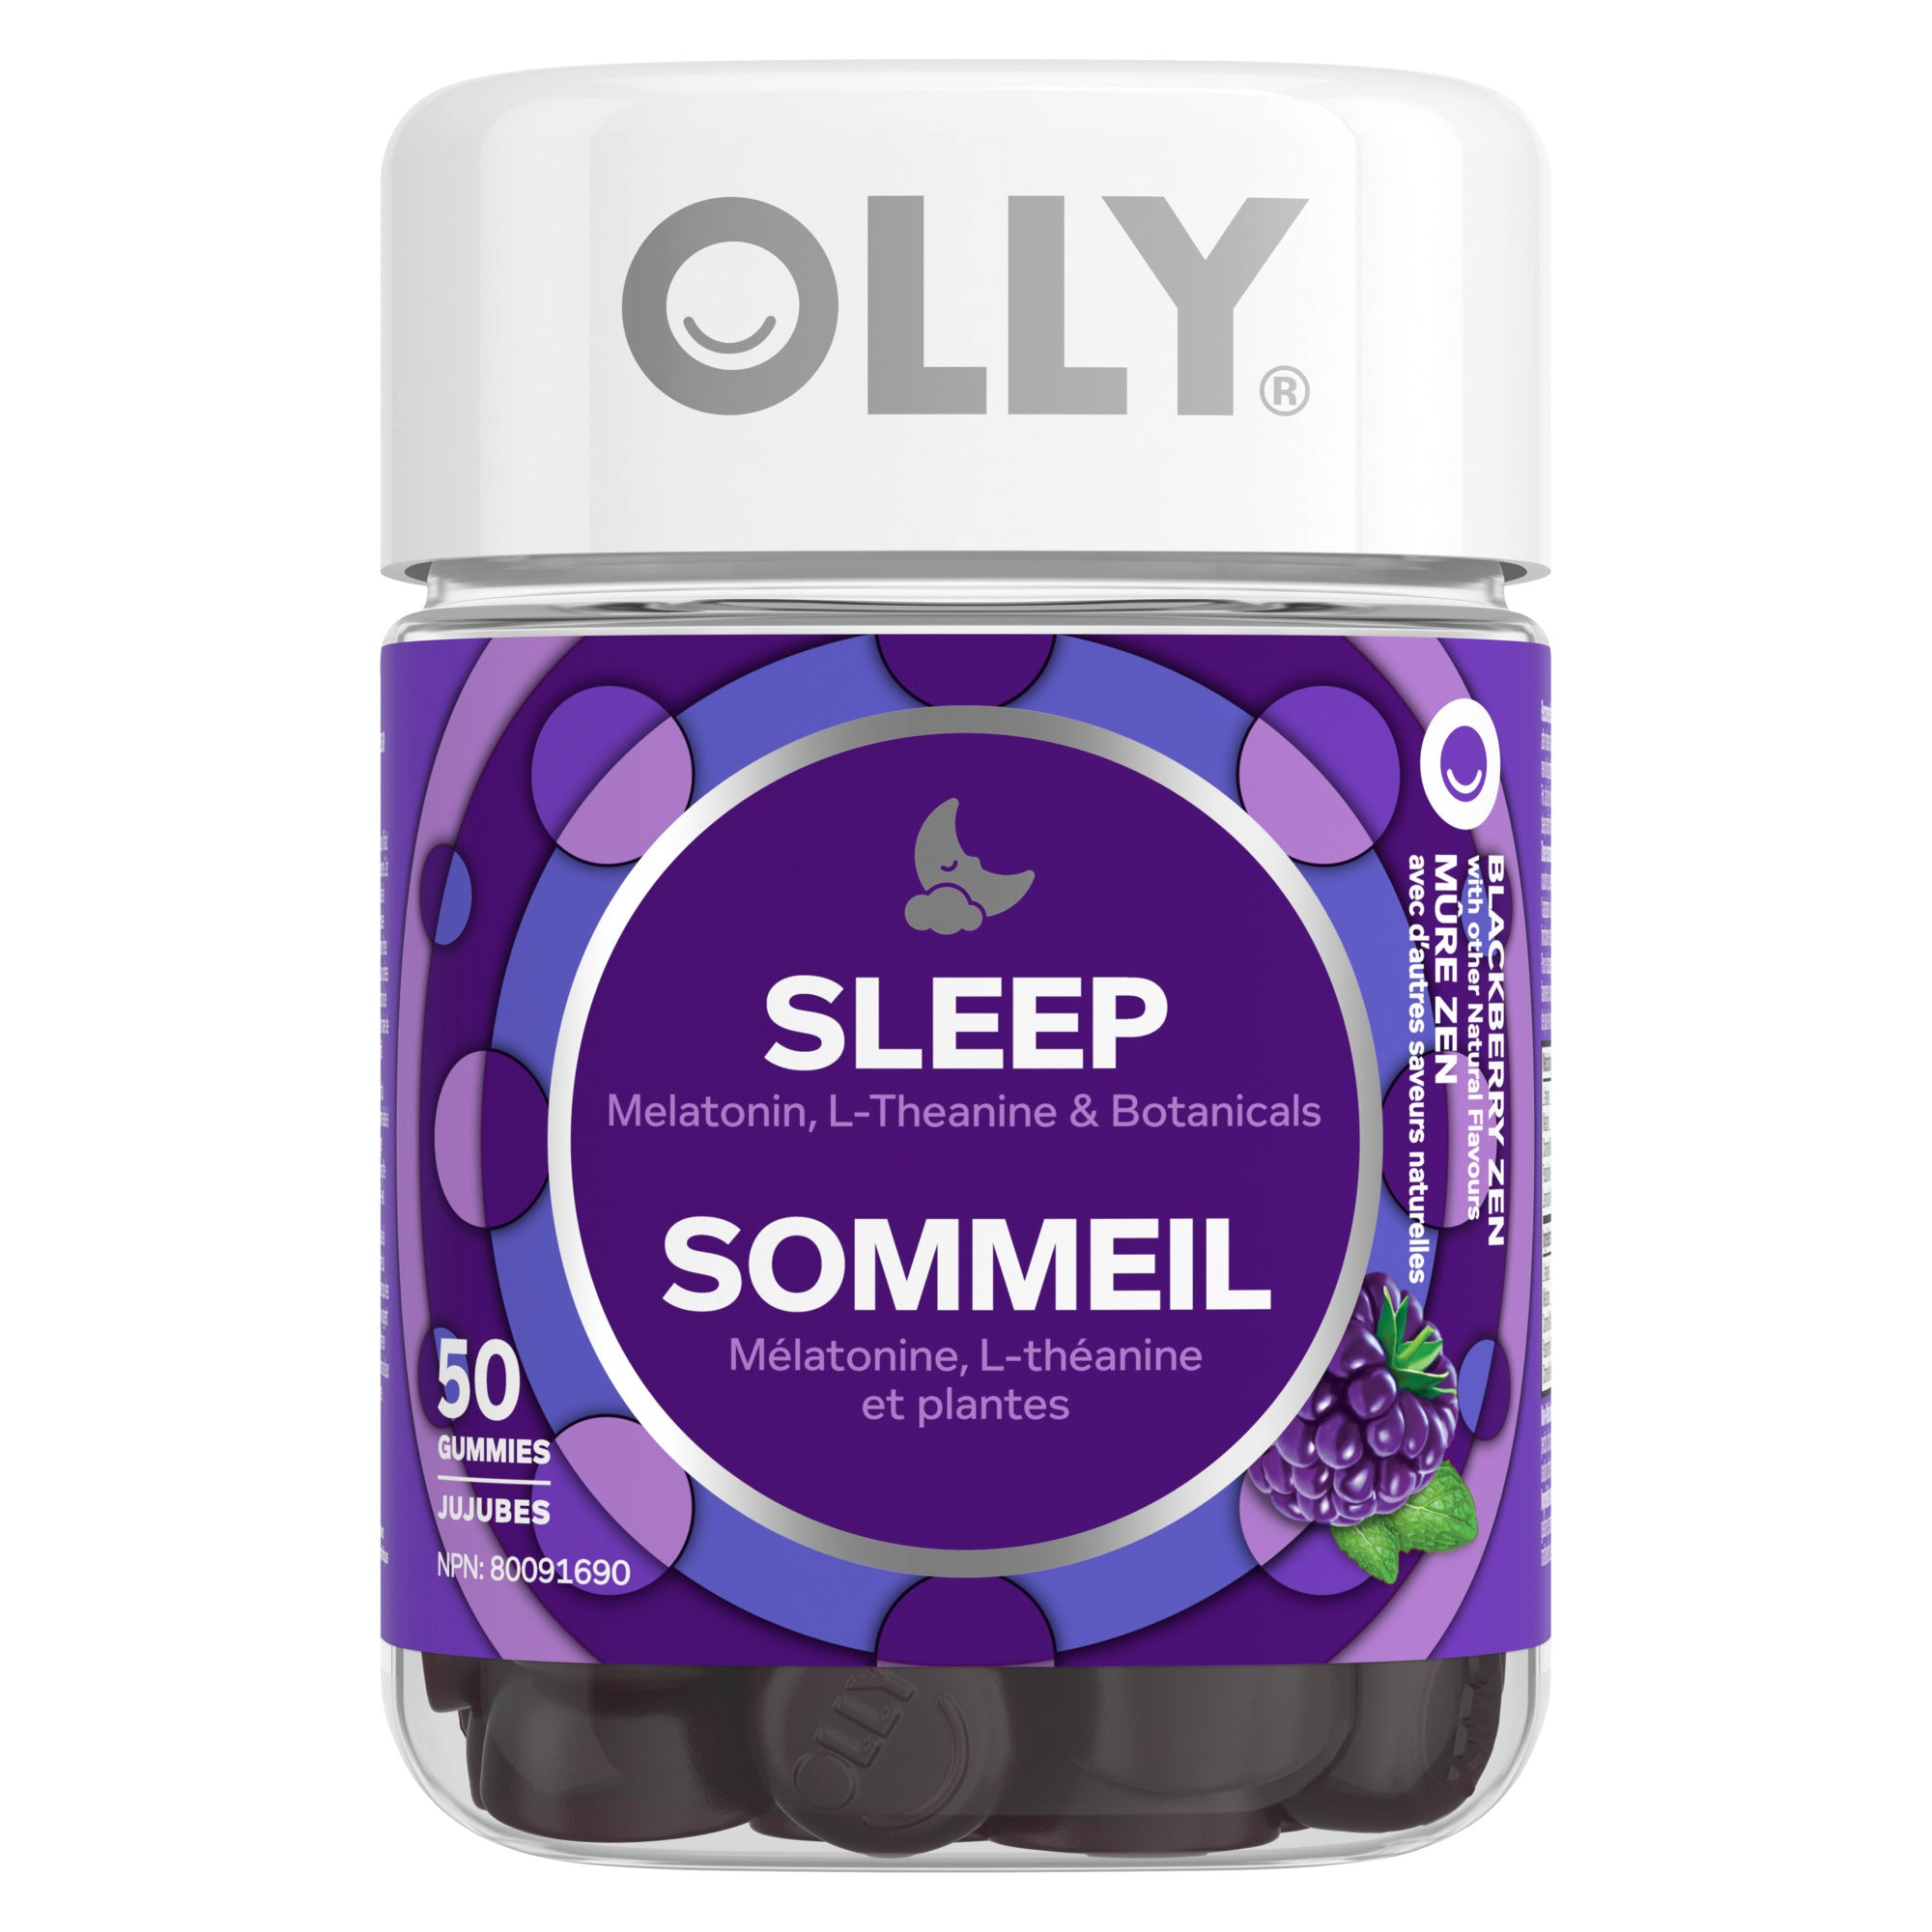 An image showing the frontside view of the OLLY® Sleep product packaging.